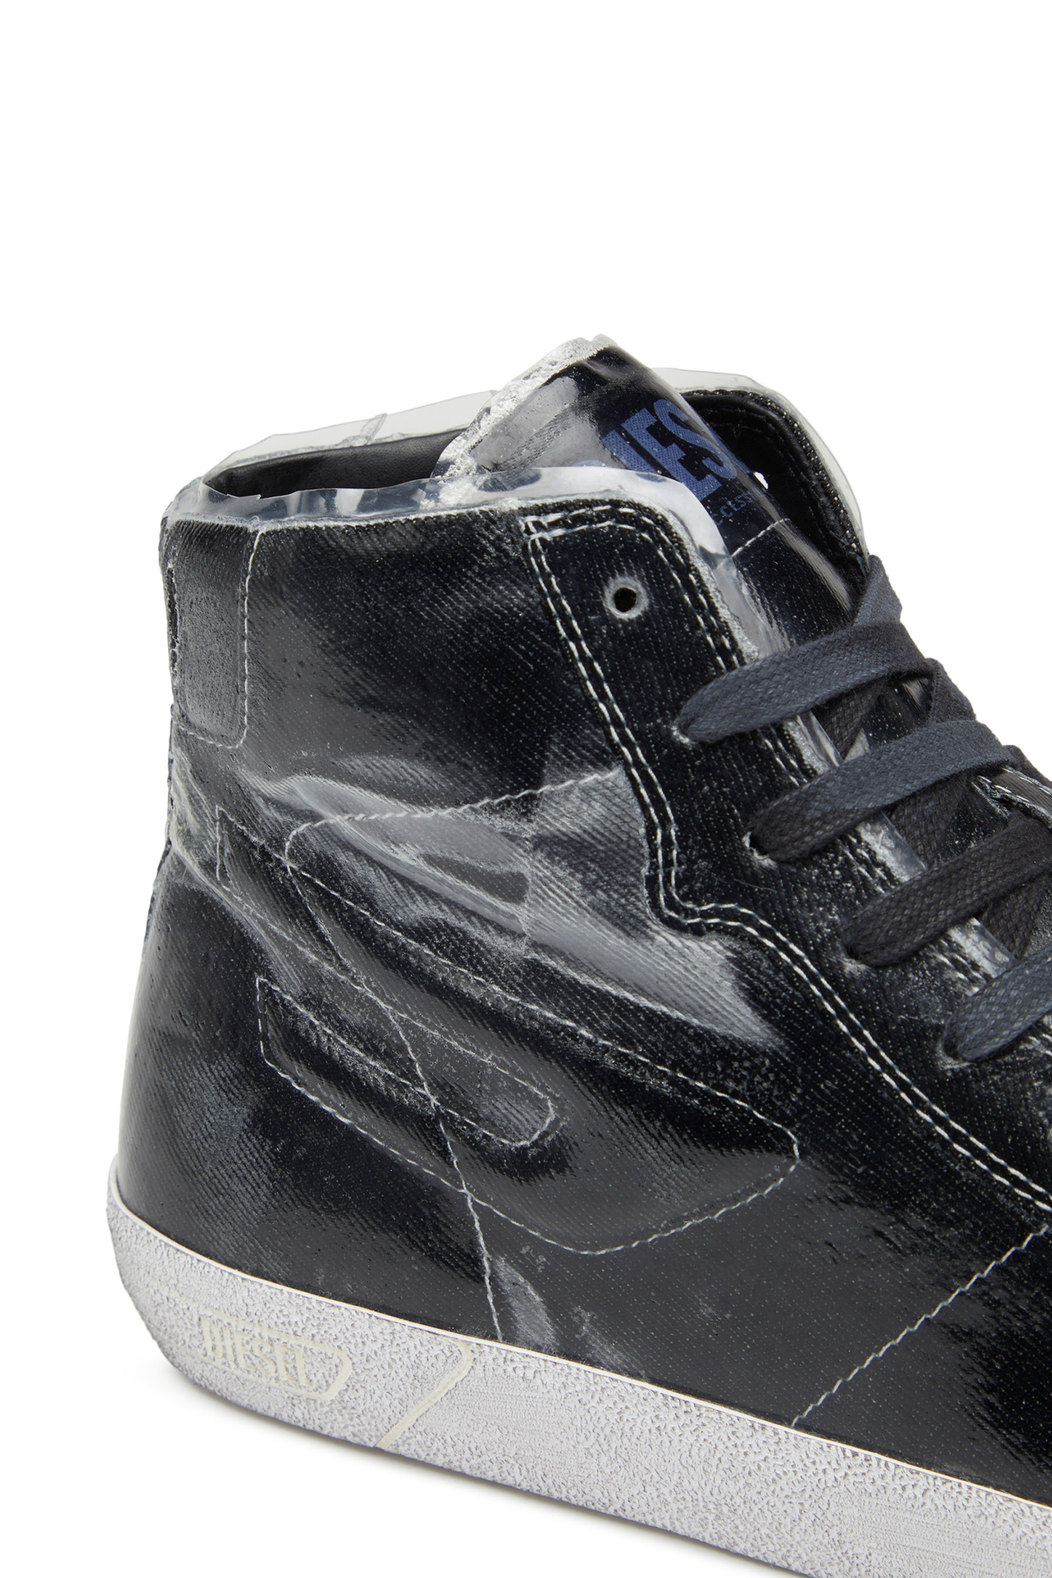 S-Leroji Mid - High-top canvas sneakers with TPU overlay